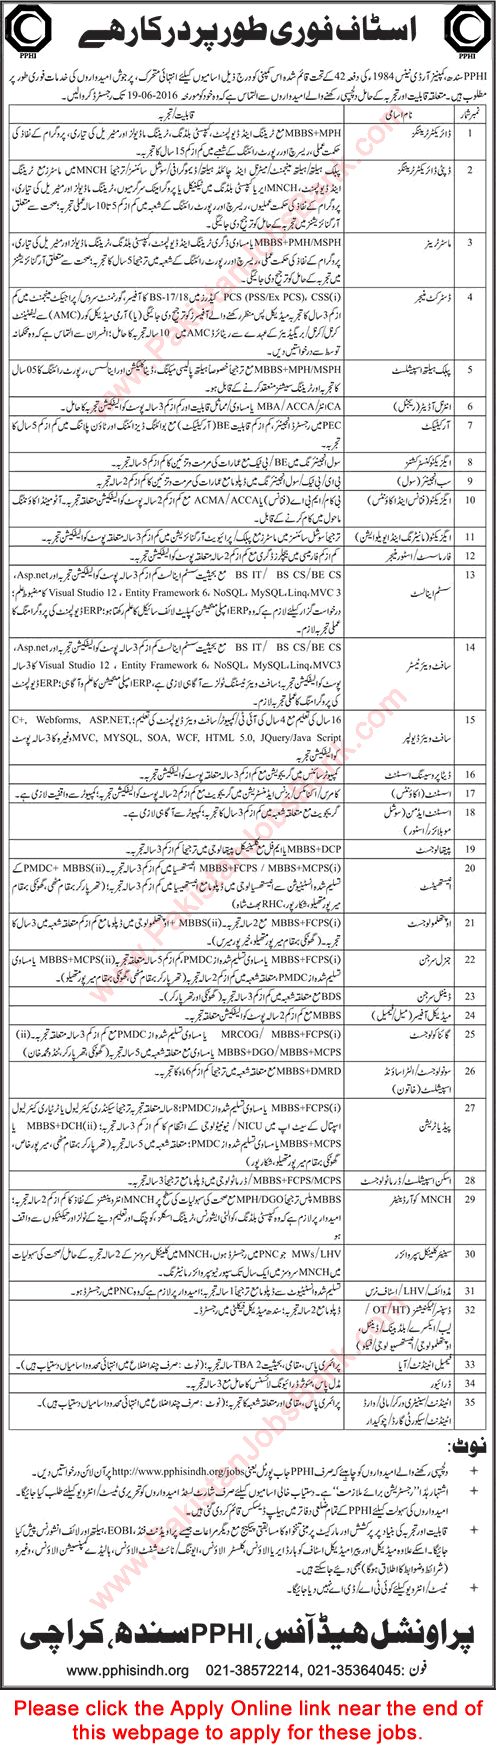 PPHI Sindh Jobs June 2016 Apply Online Medical Officers, Specialist Doctors, Technicians & Others Latest